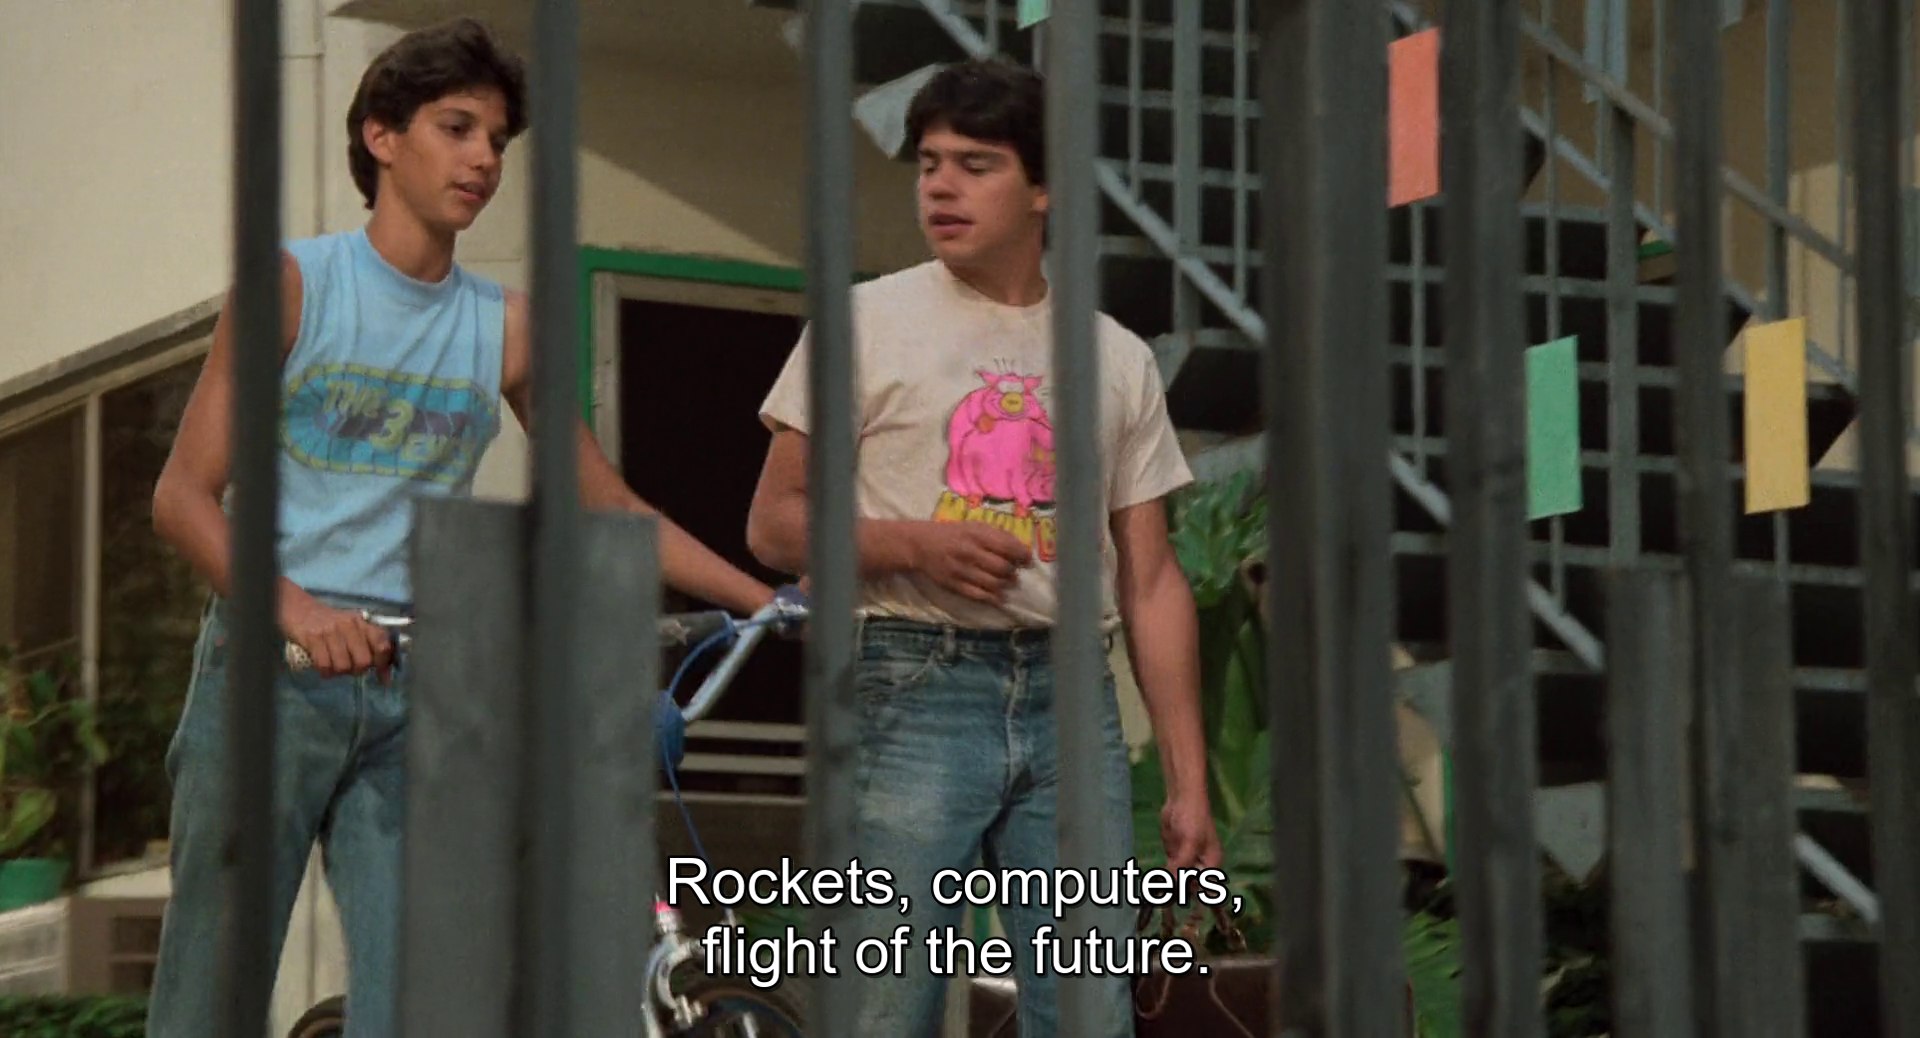 
Daniel and Freddy having the dialogue described above.
The subtitles read: Rockets, computers, flight of the future.
